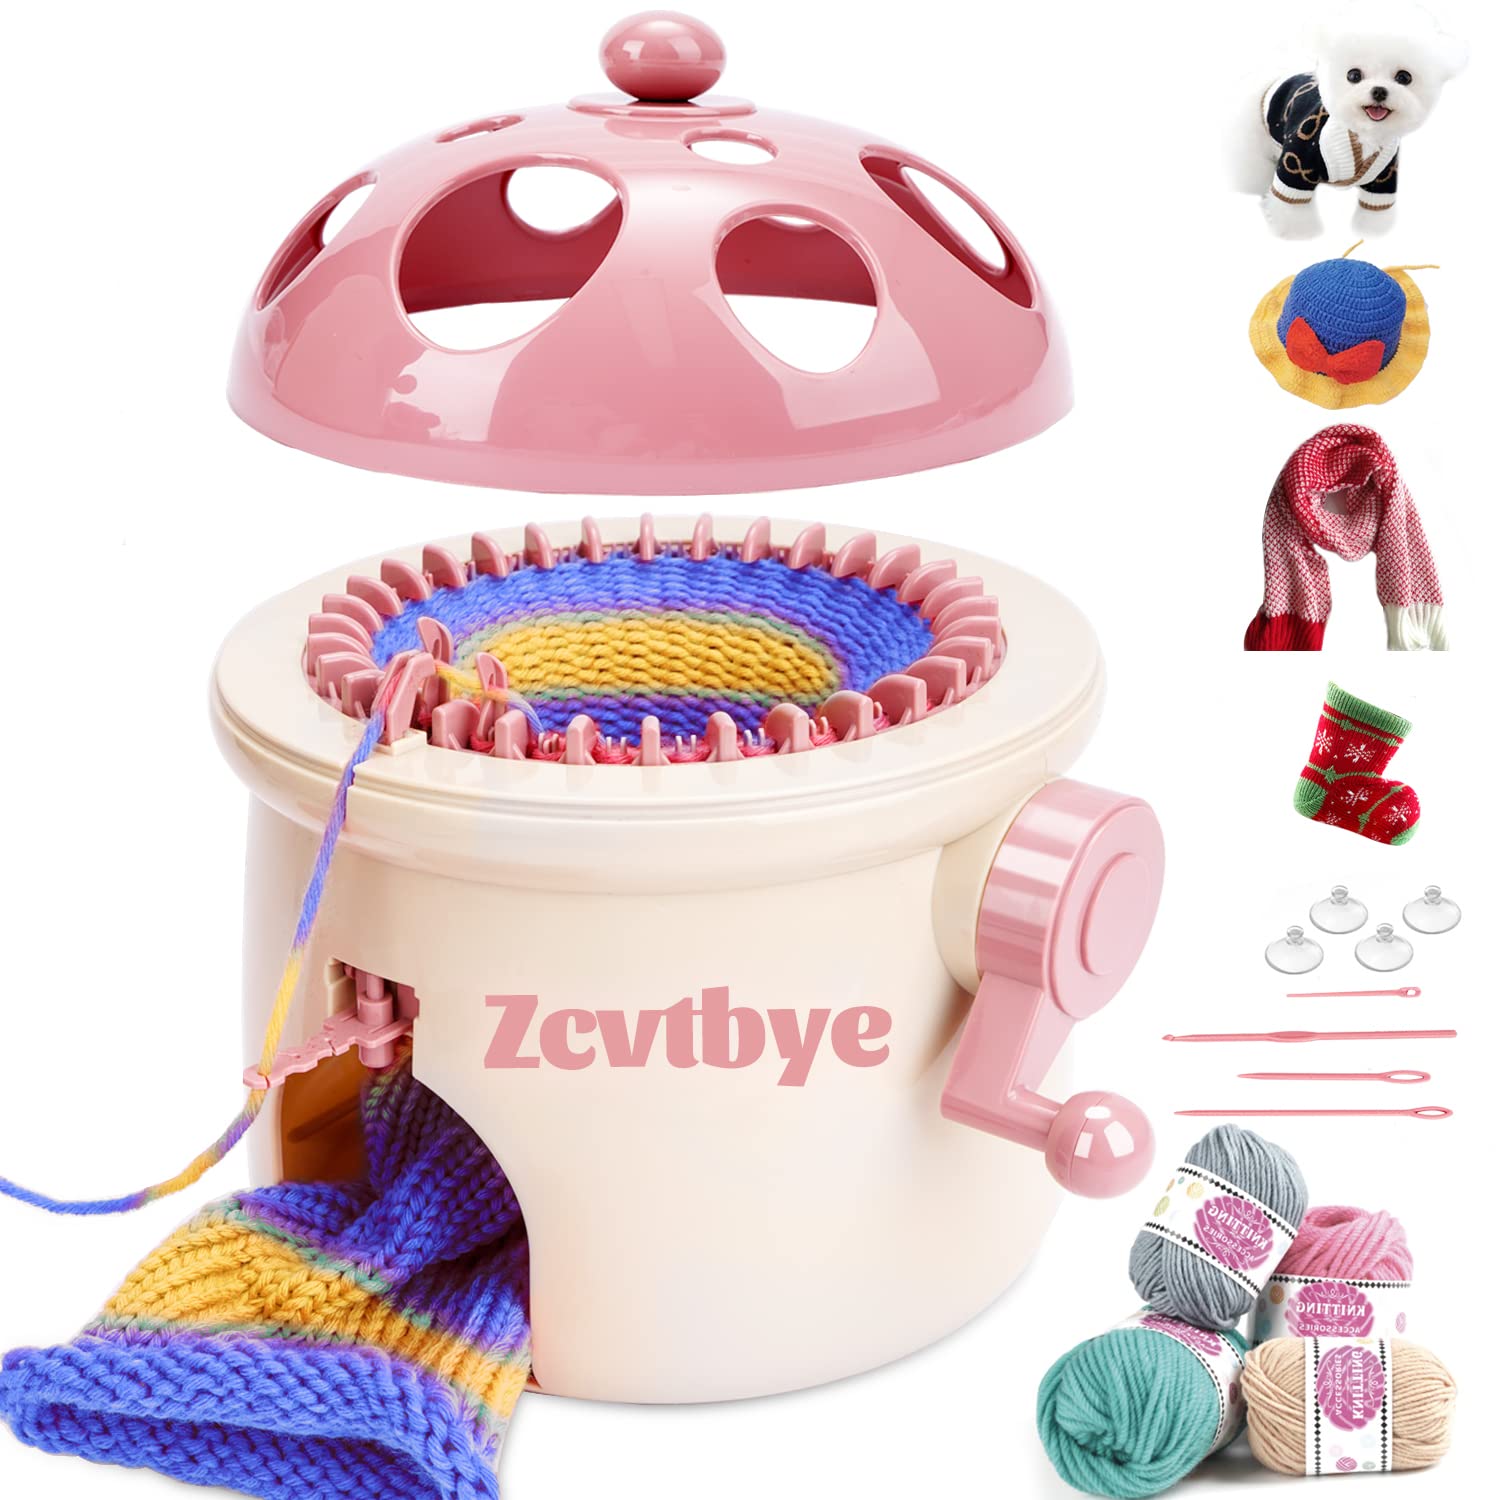 BESLY Kid Girls 22 Needles Knitting Machine Toys Smart 48 Needles  Hand-knitted Round Loom Machine Toys for 5-12 Year Old 